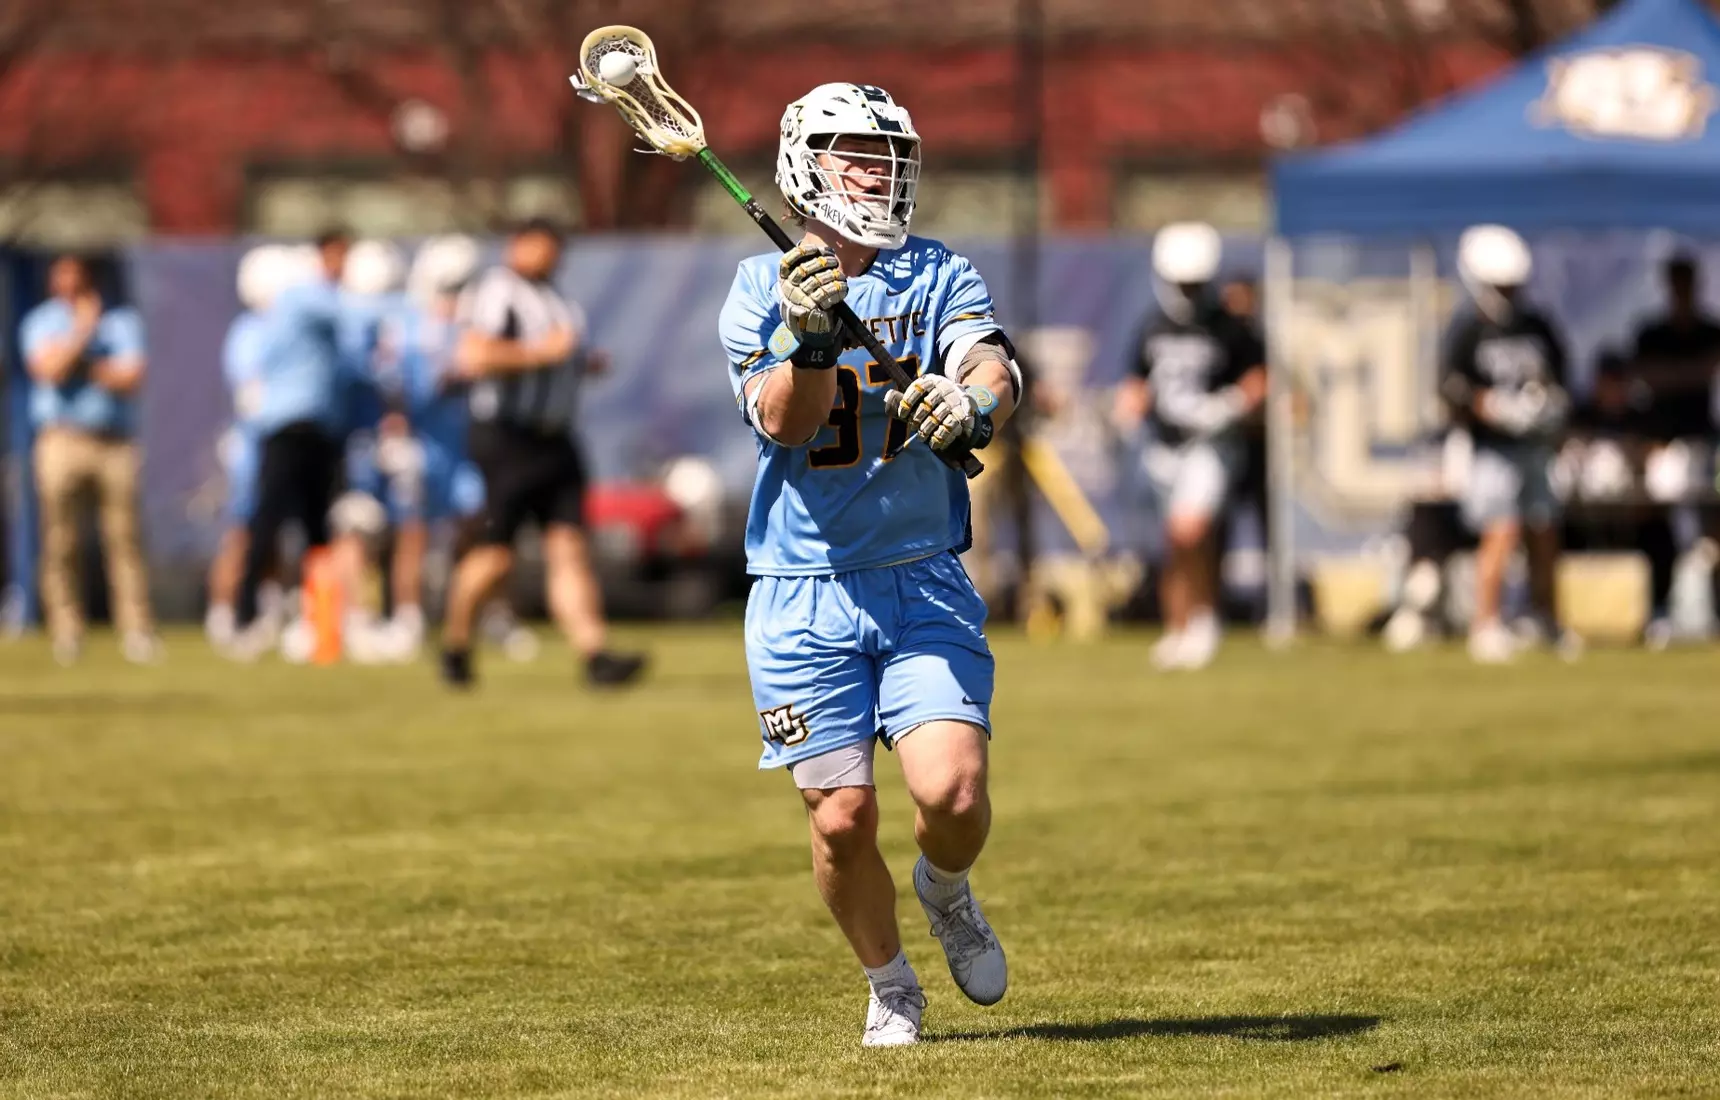 Marquette Men’s Lacrosse Falls Short to Providence 13-10 at Valley Fields